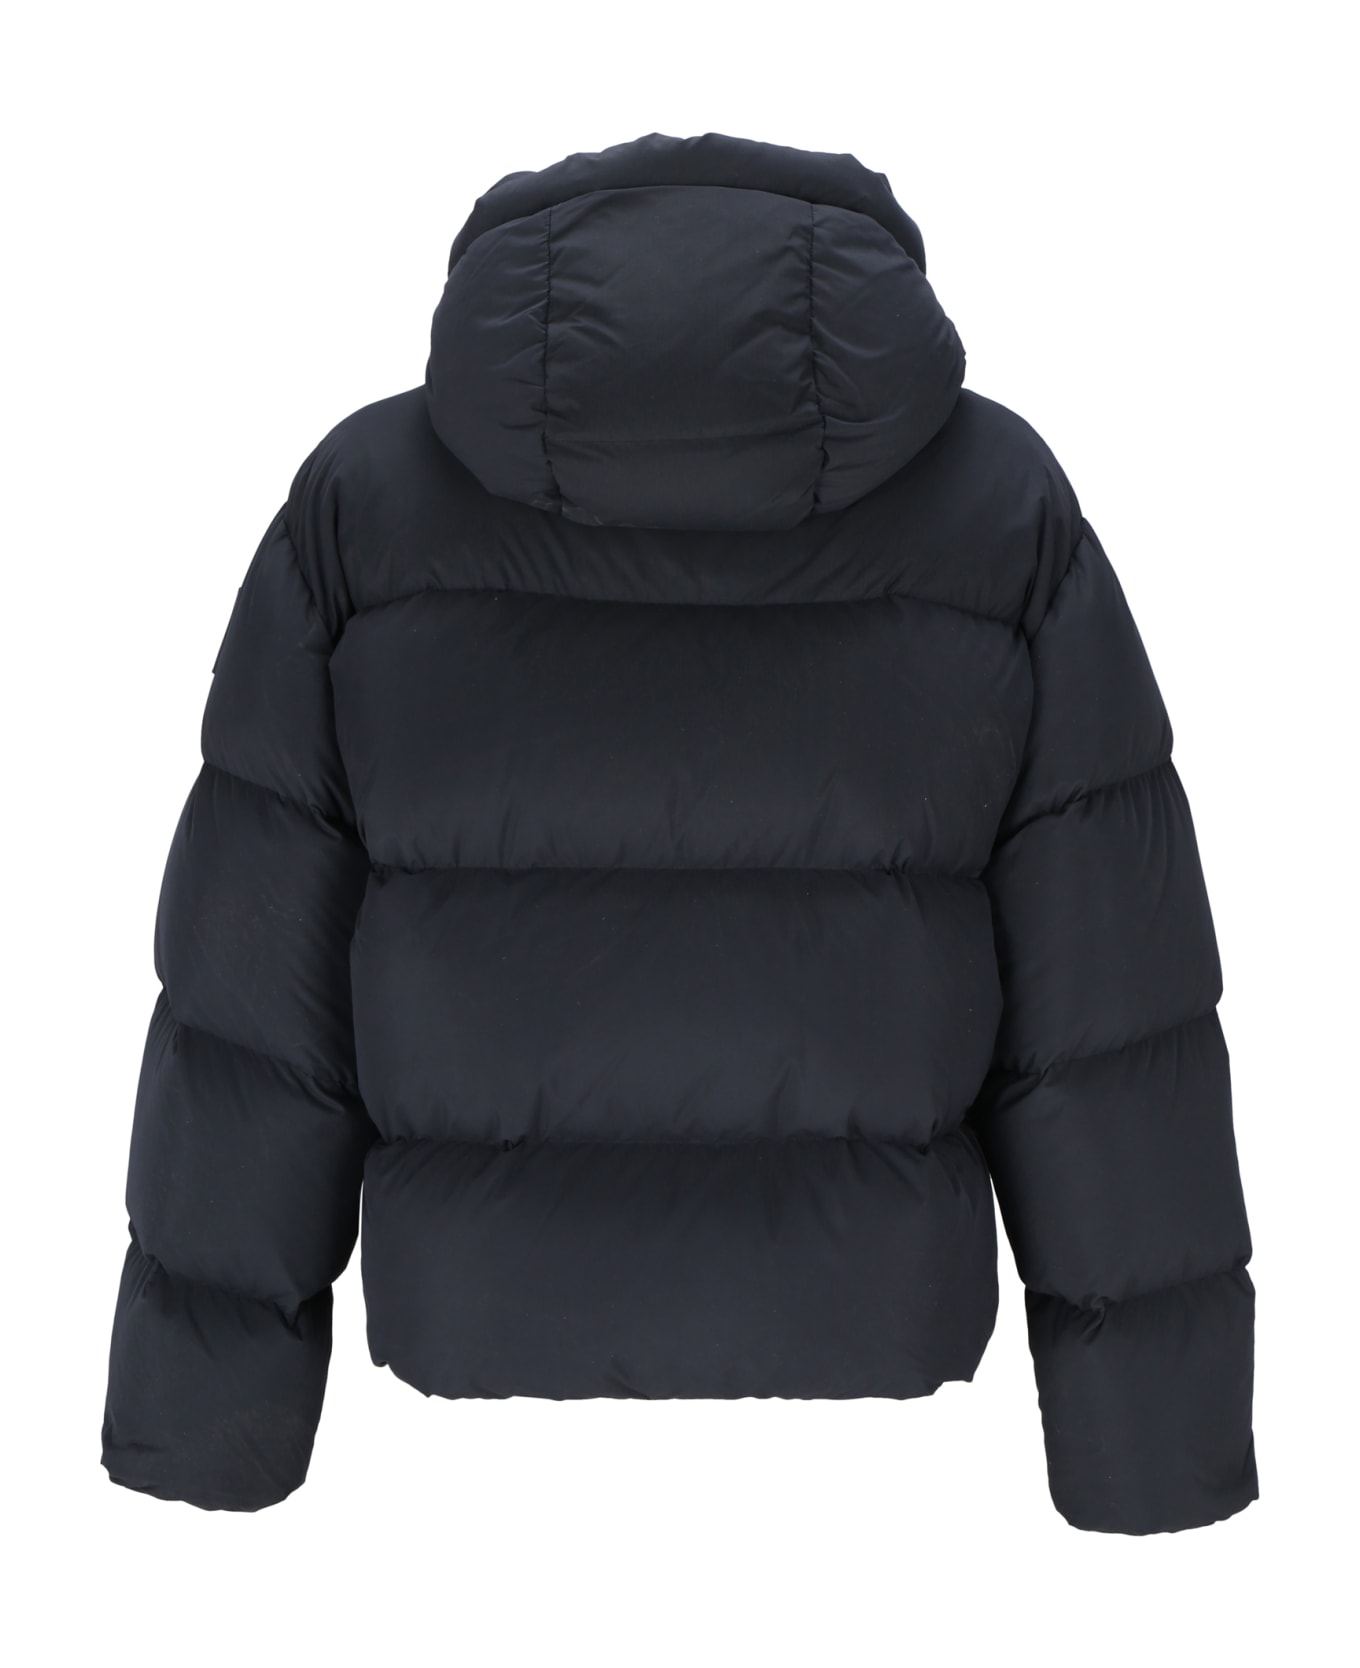 Off-White Patch Arrow Down Puffer - Black Blac